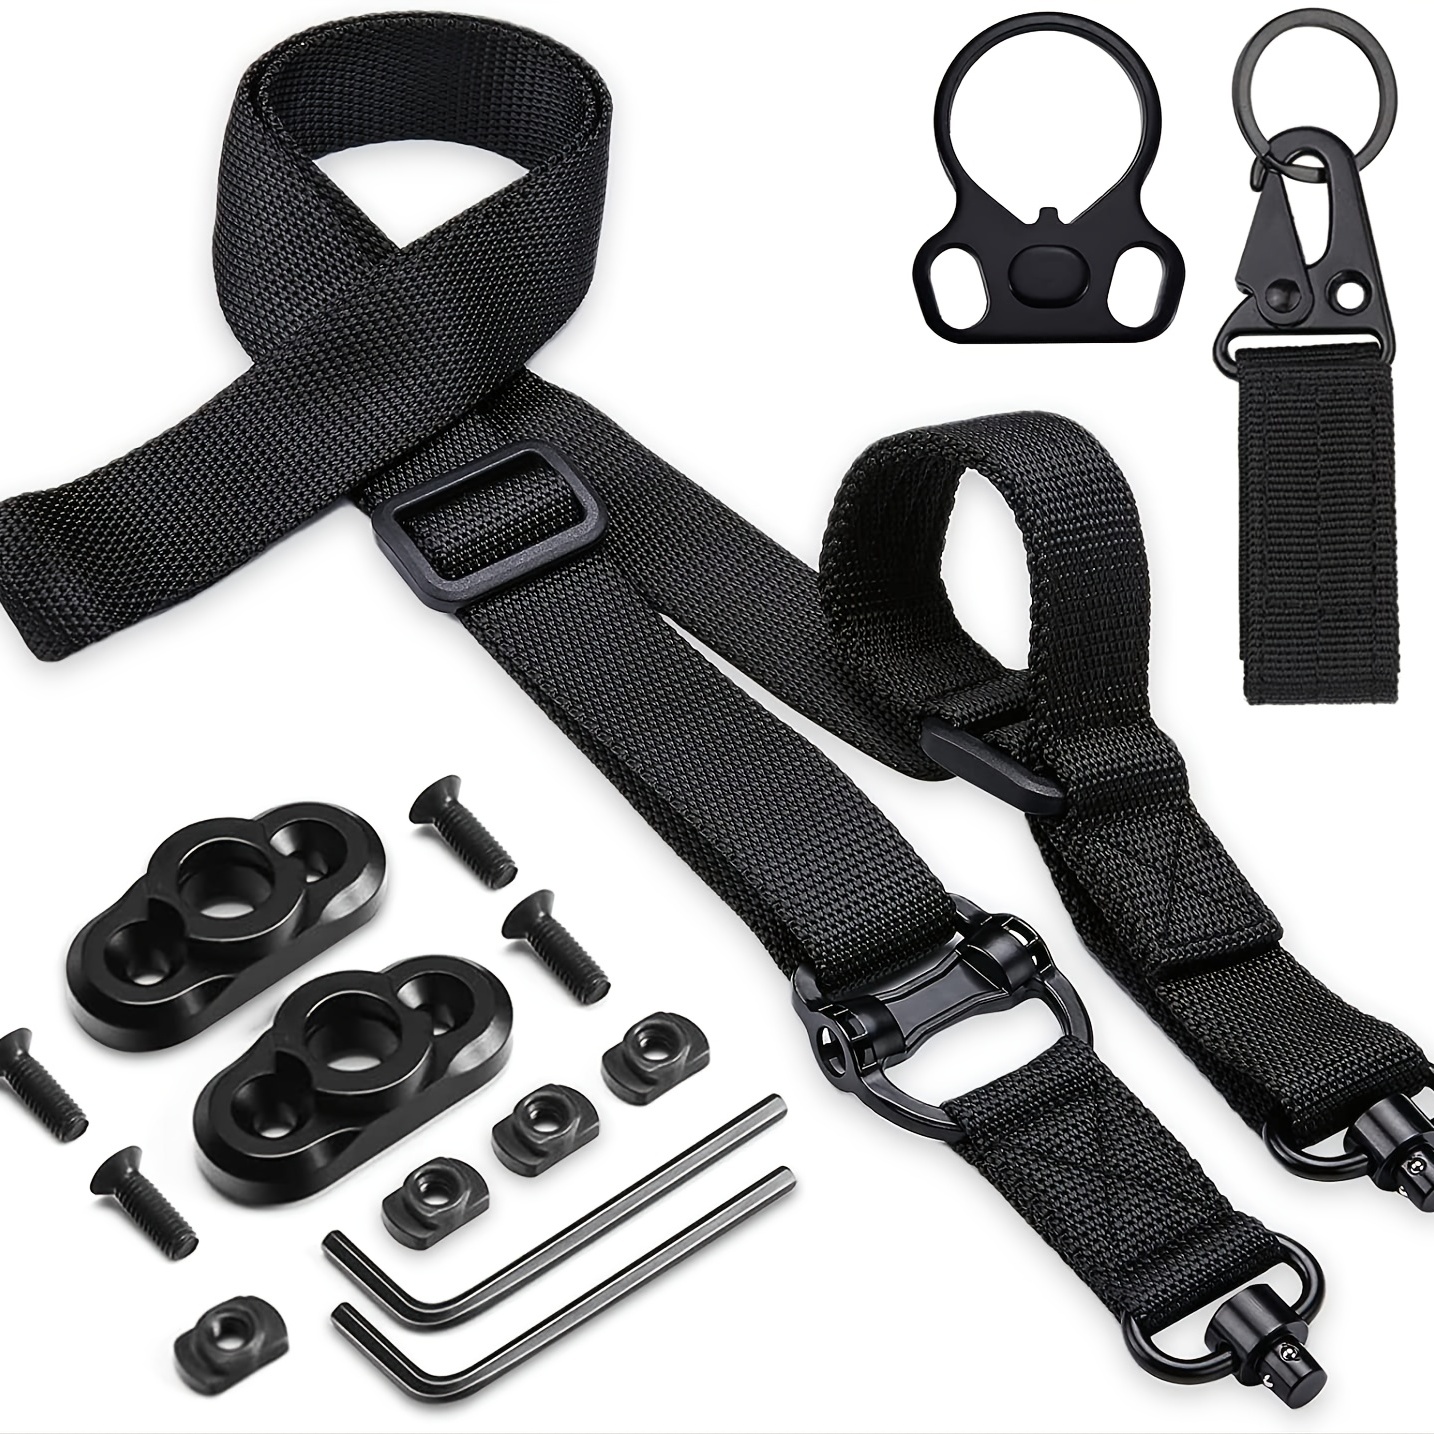 2 Point Sling Quick Adjust With QD Sling Swivels